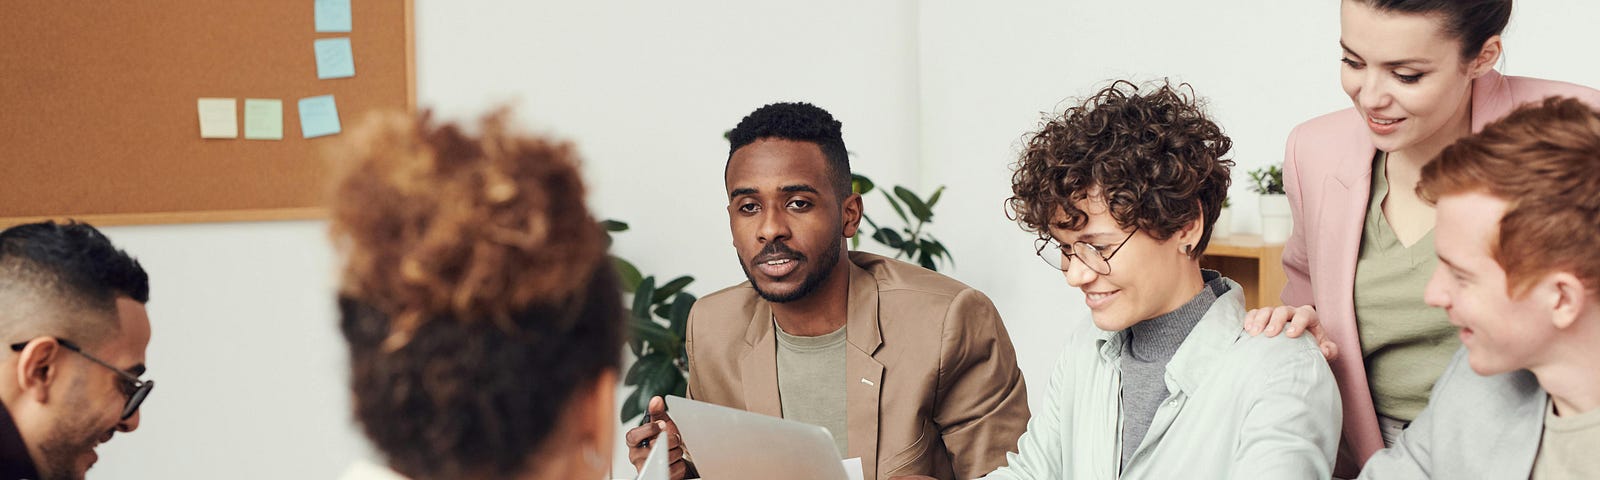 A healthy Scrum Team sitting around a desk collaborating | Photo by fauxels on Pexels